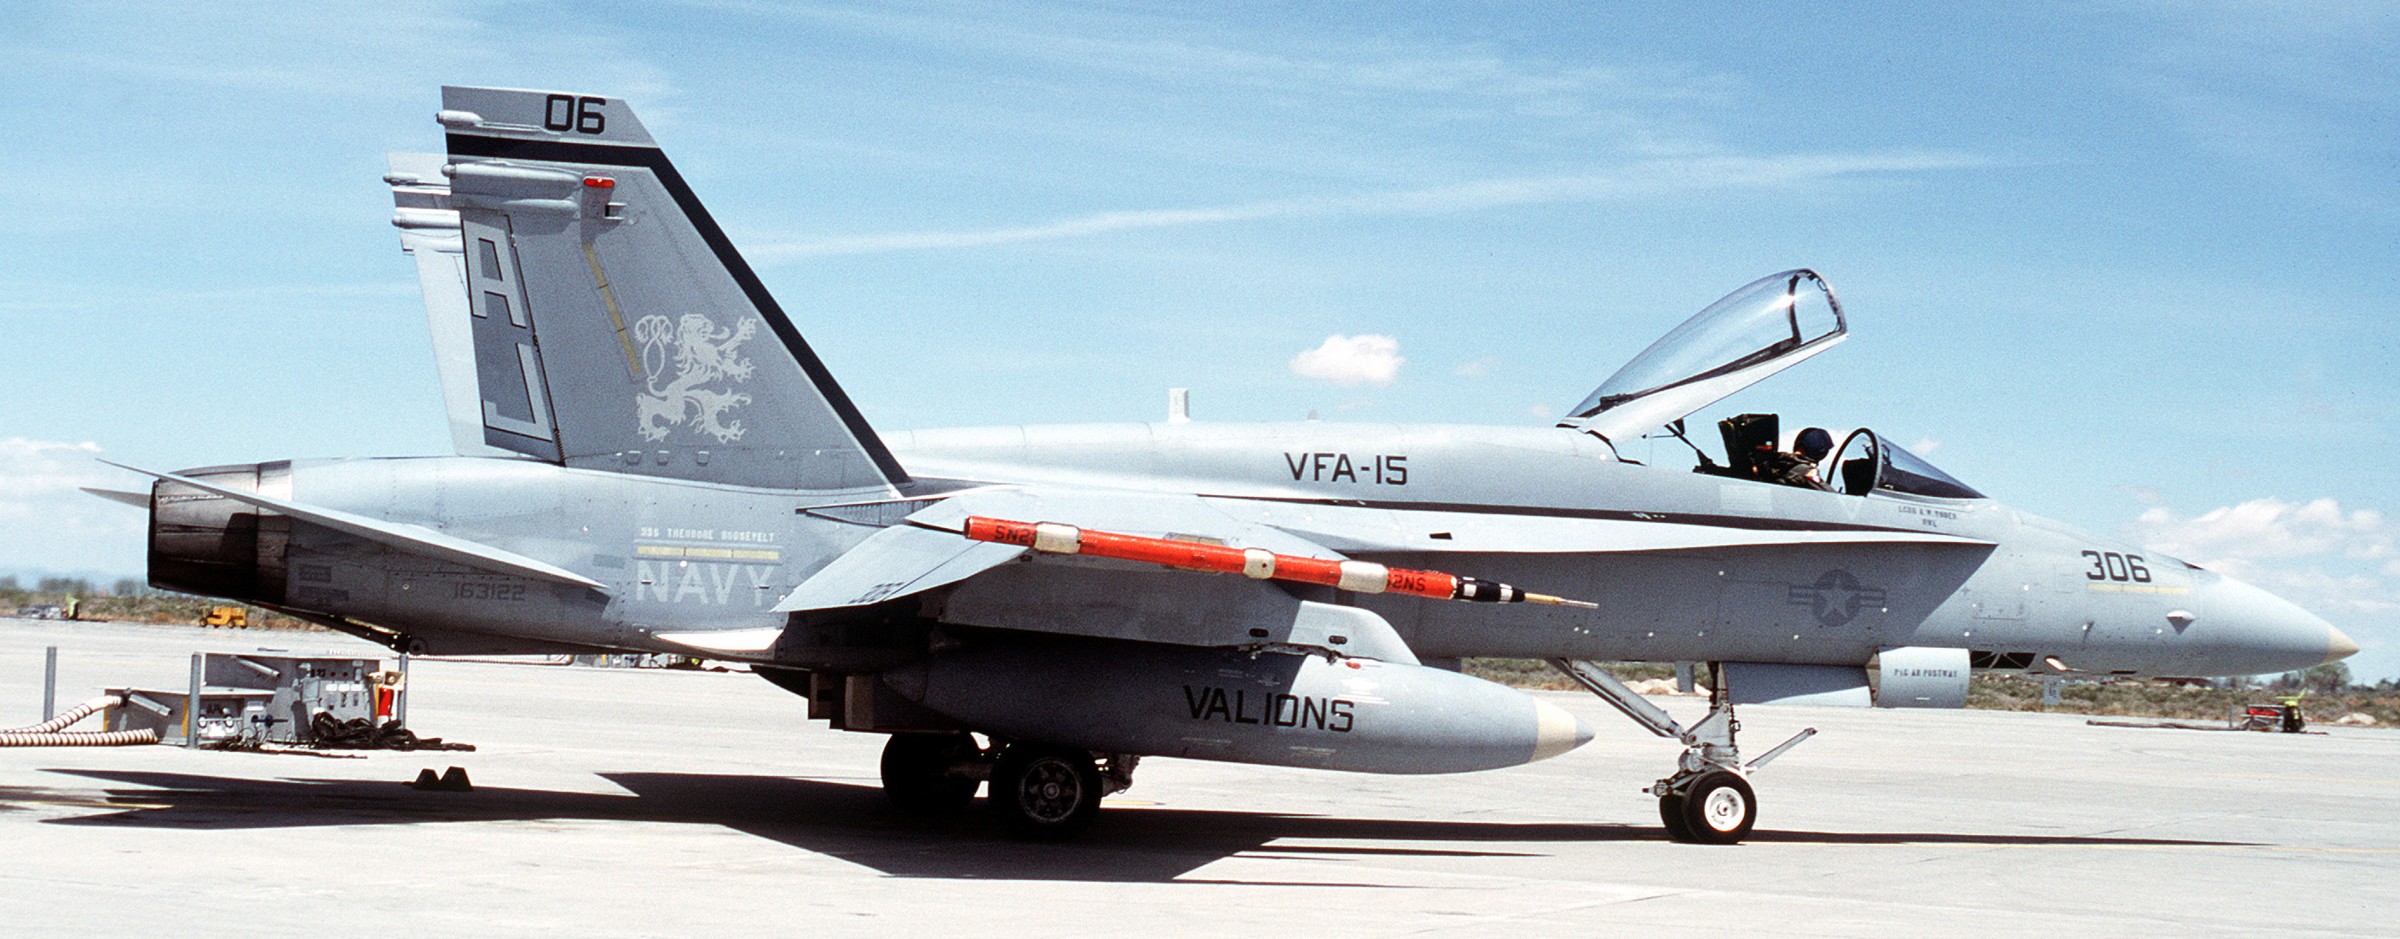 vfa-15 valions f/a-18a hornet